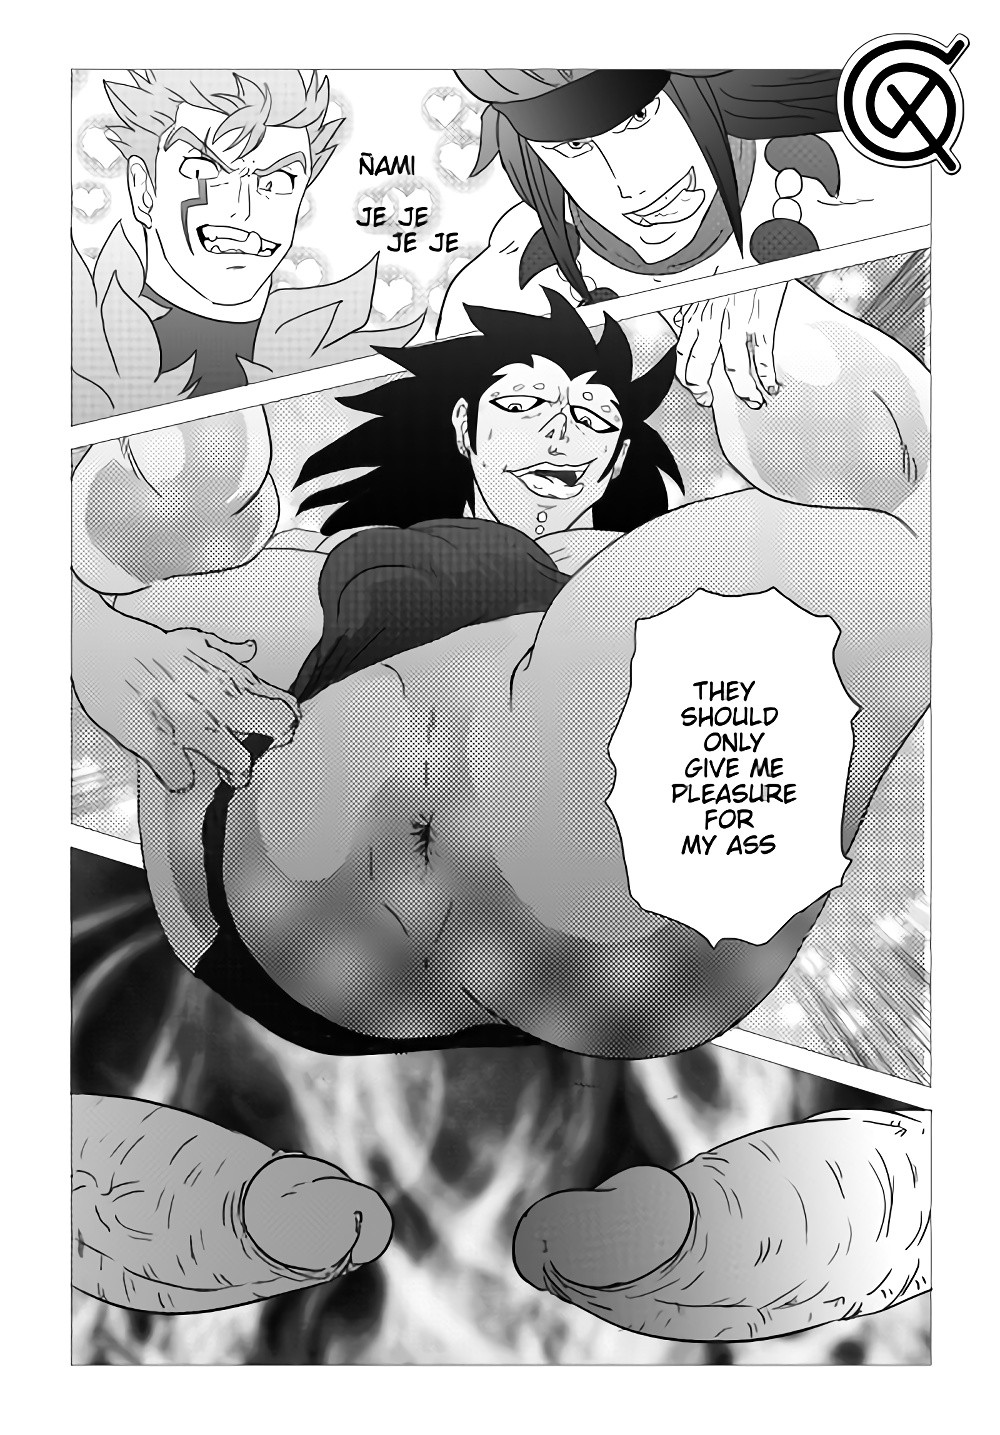 Gajeel getting paid porn comic picture 2